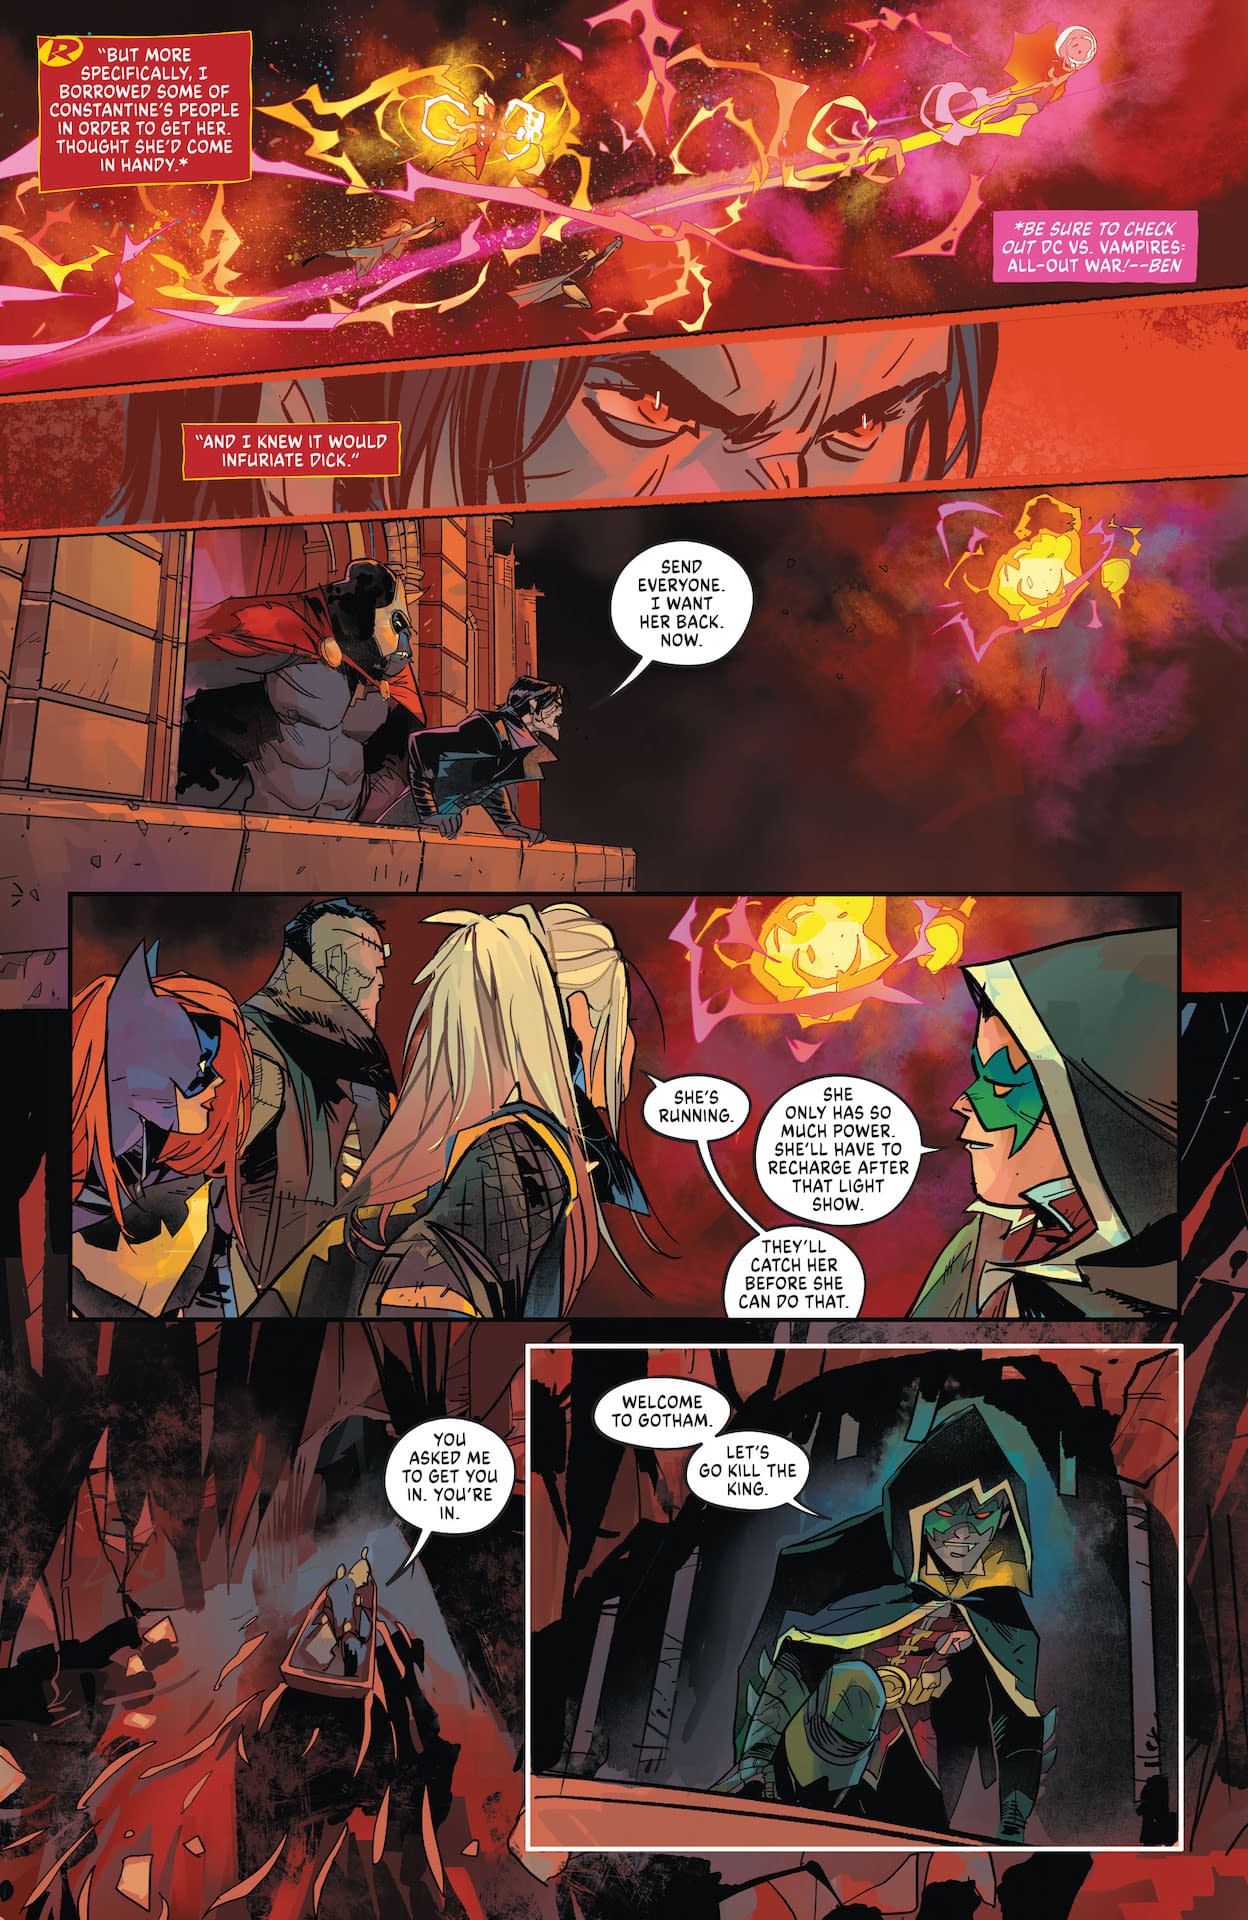 DC vs. Vampires #10 Preview: Welcome to Gotham